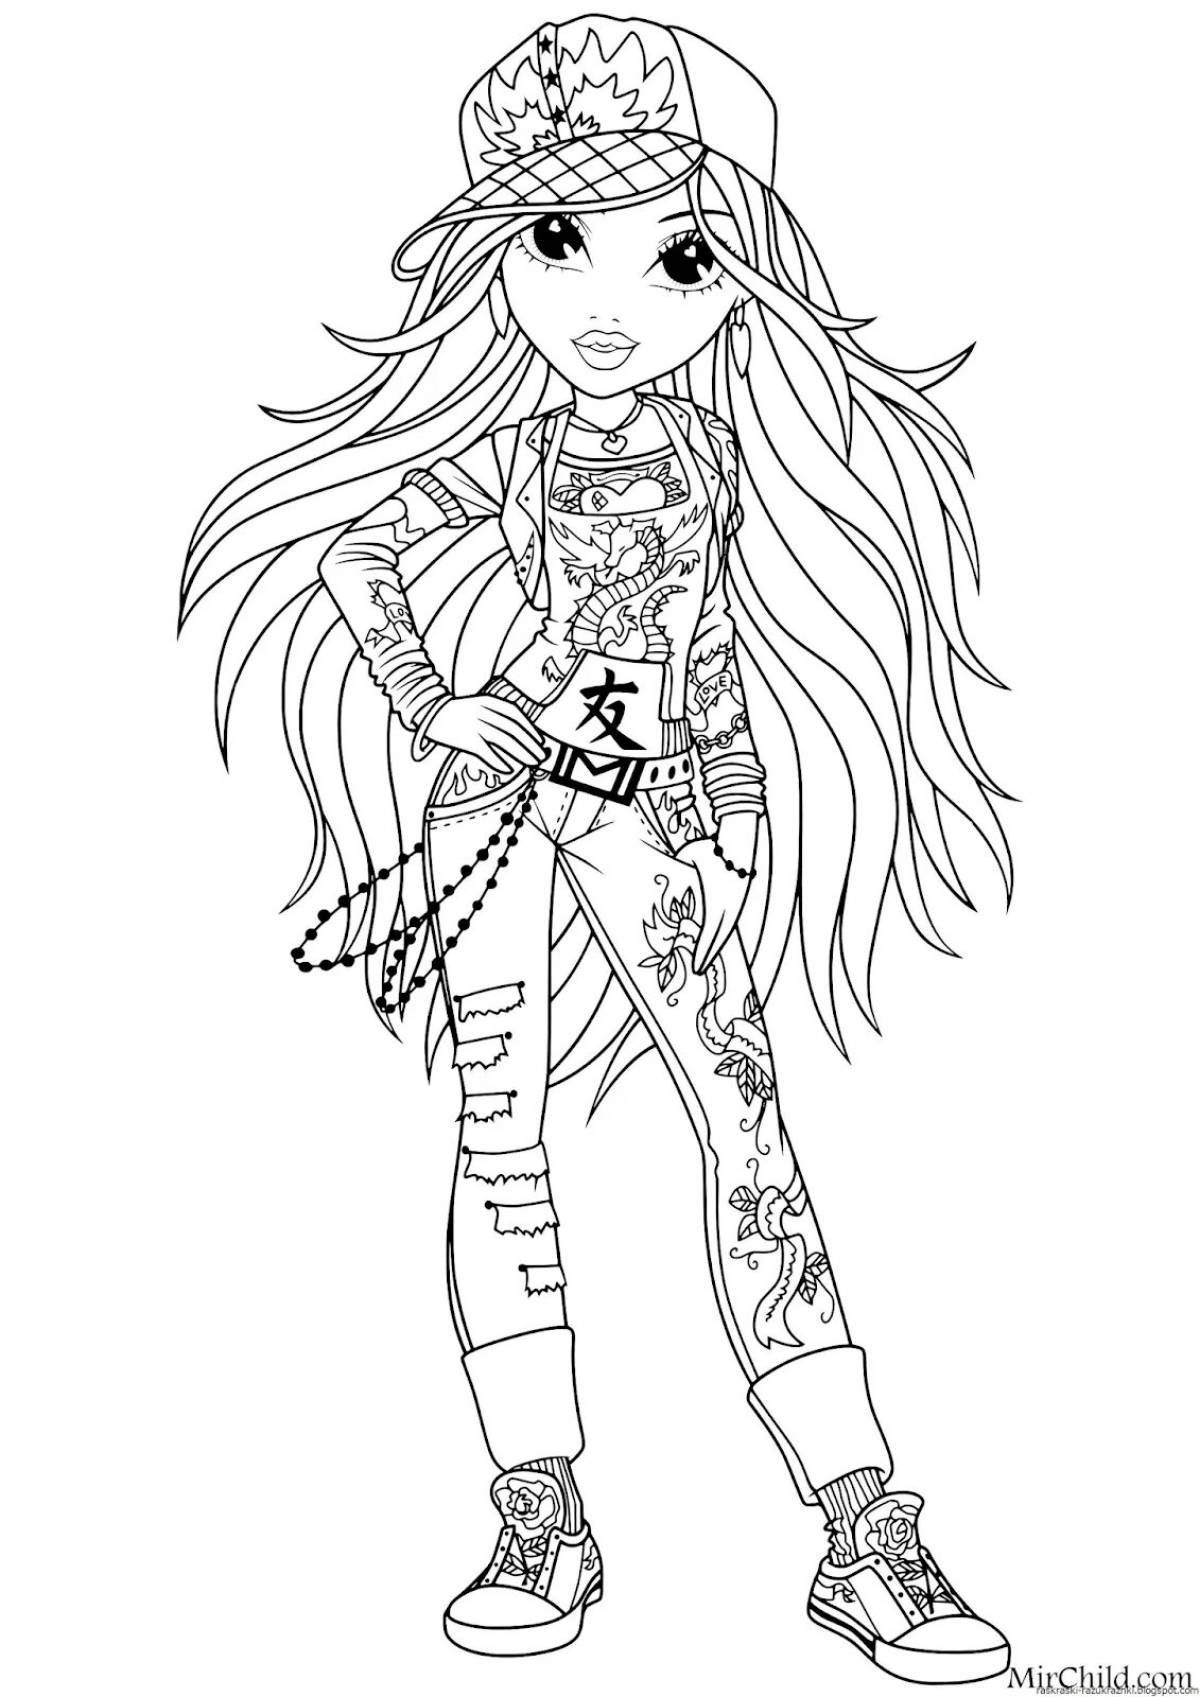 Glowing coloring page 11 for girls